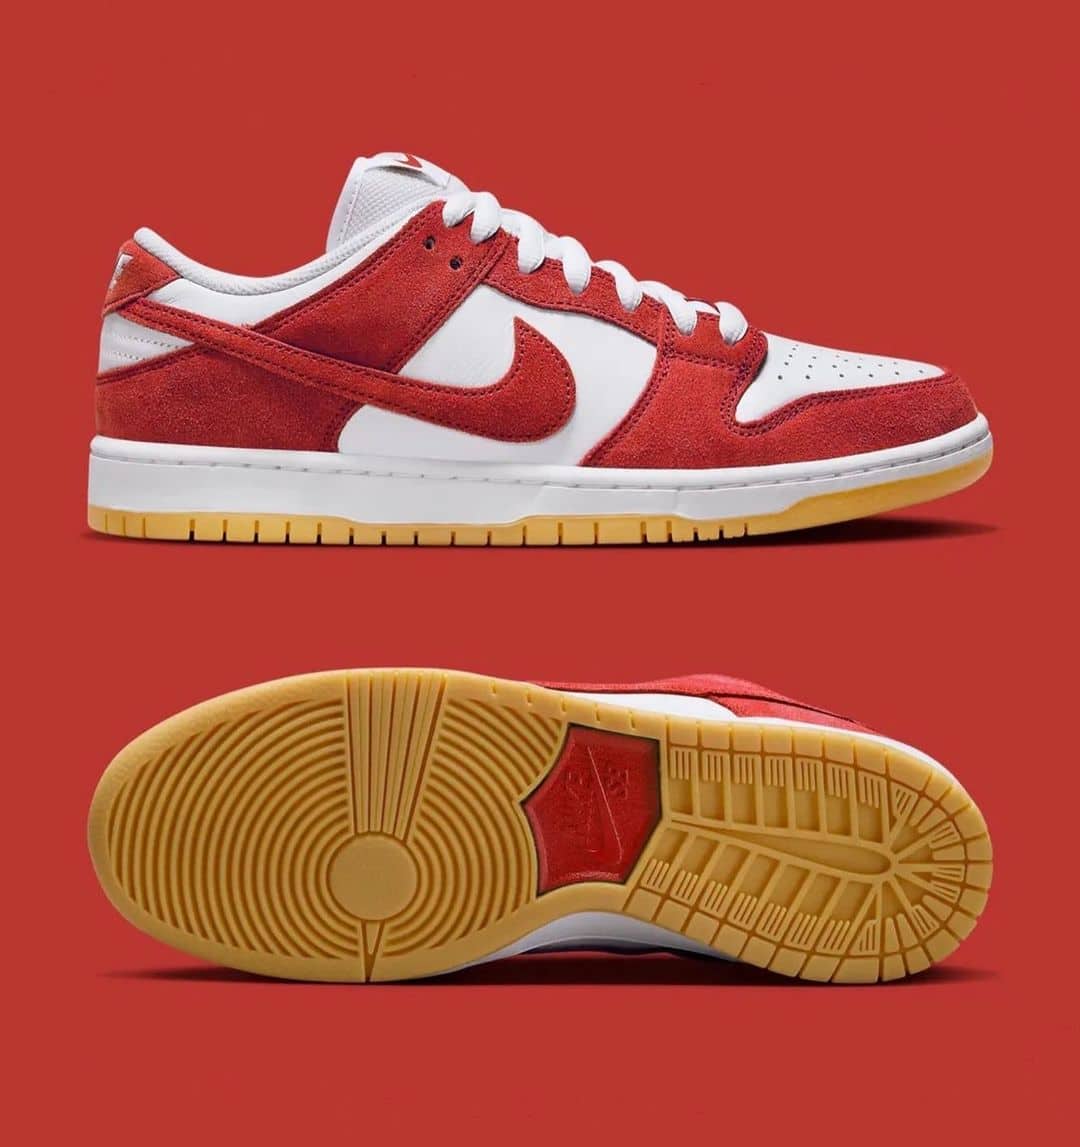 Crimson Comfort: Unveiling the Nike SB Dunk Low "Red Suede"